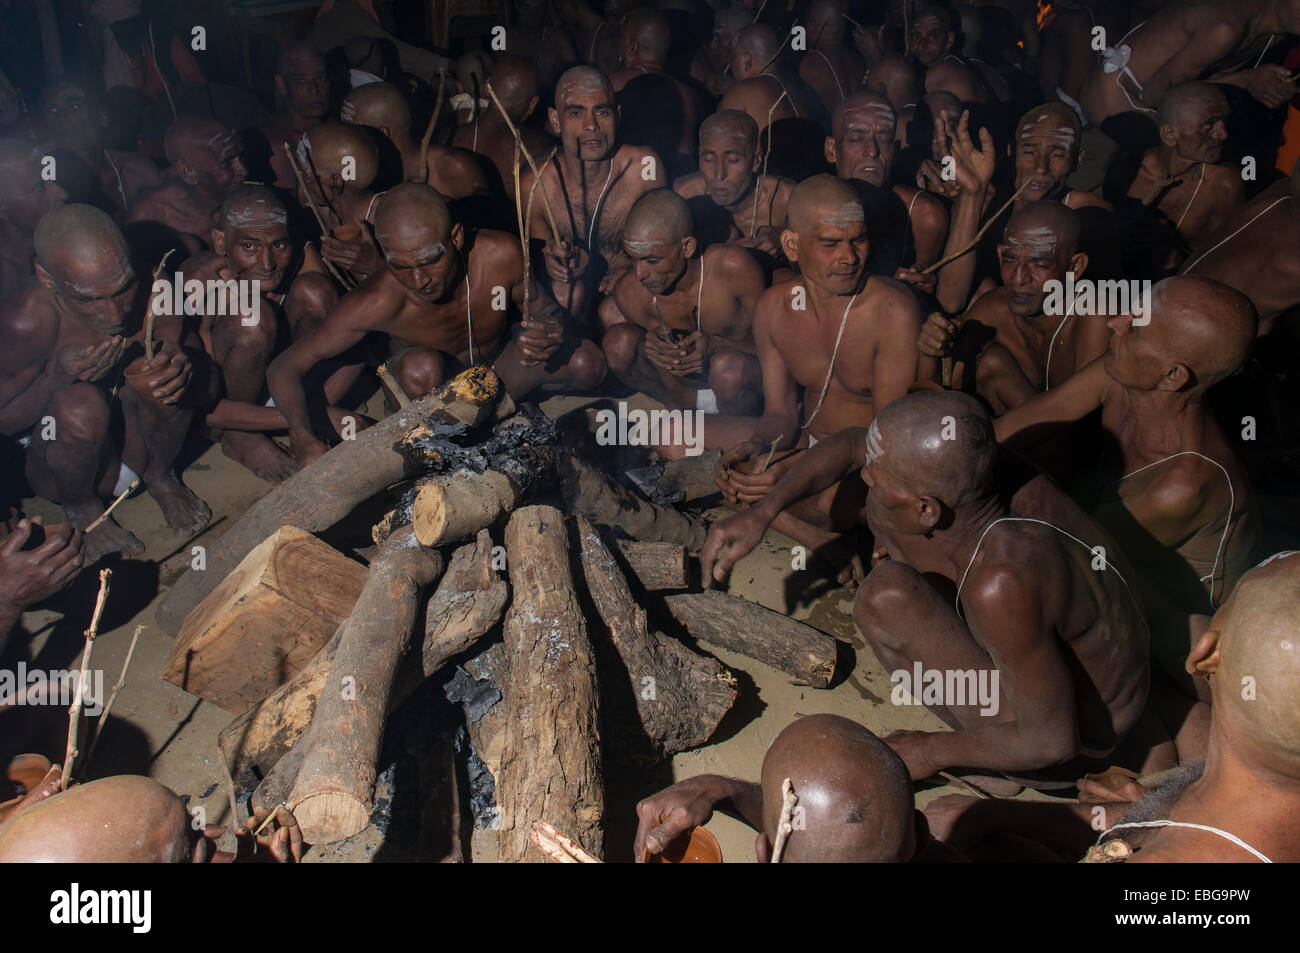 Sitting around a bonfire and chanting mantras as part of the initiation of new sadhus, during Kumbha Mela festival, Allahabad Stock Photo